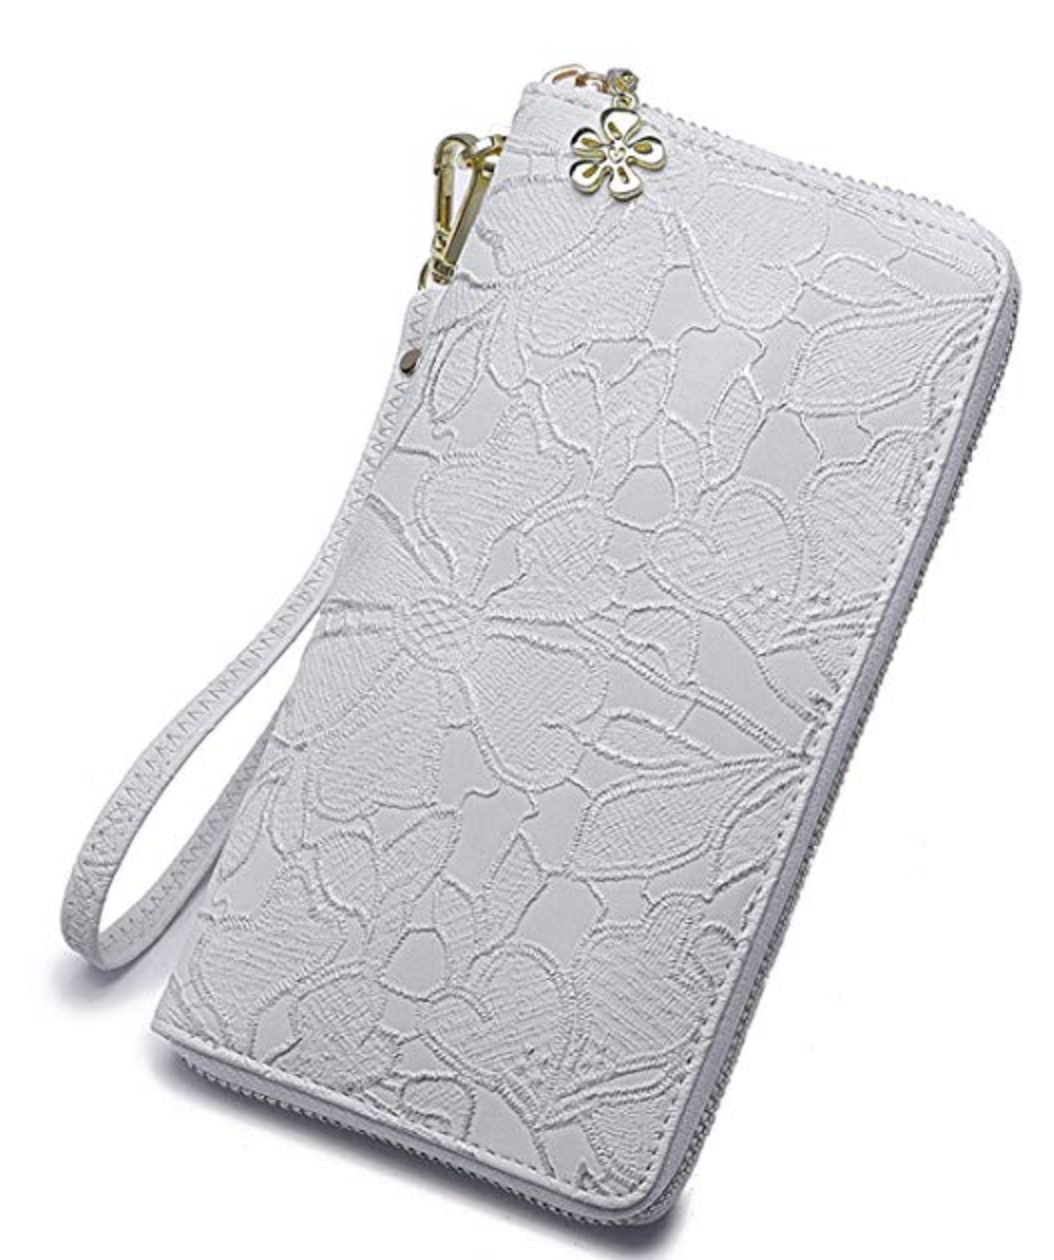 White clutch with rose emroidery